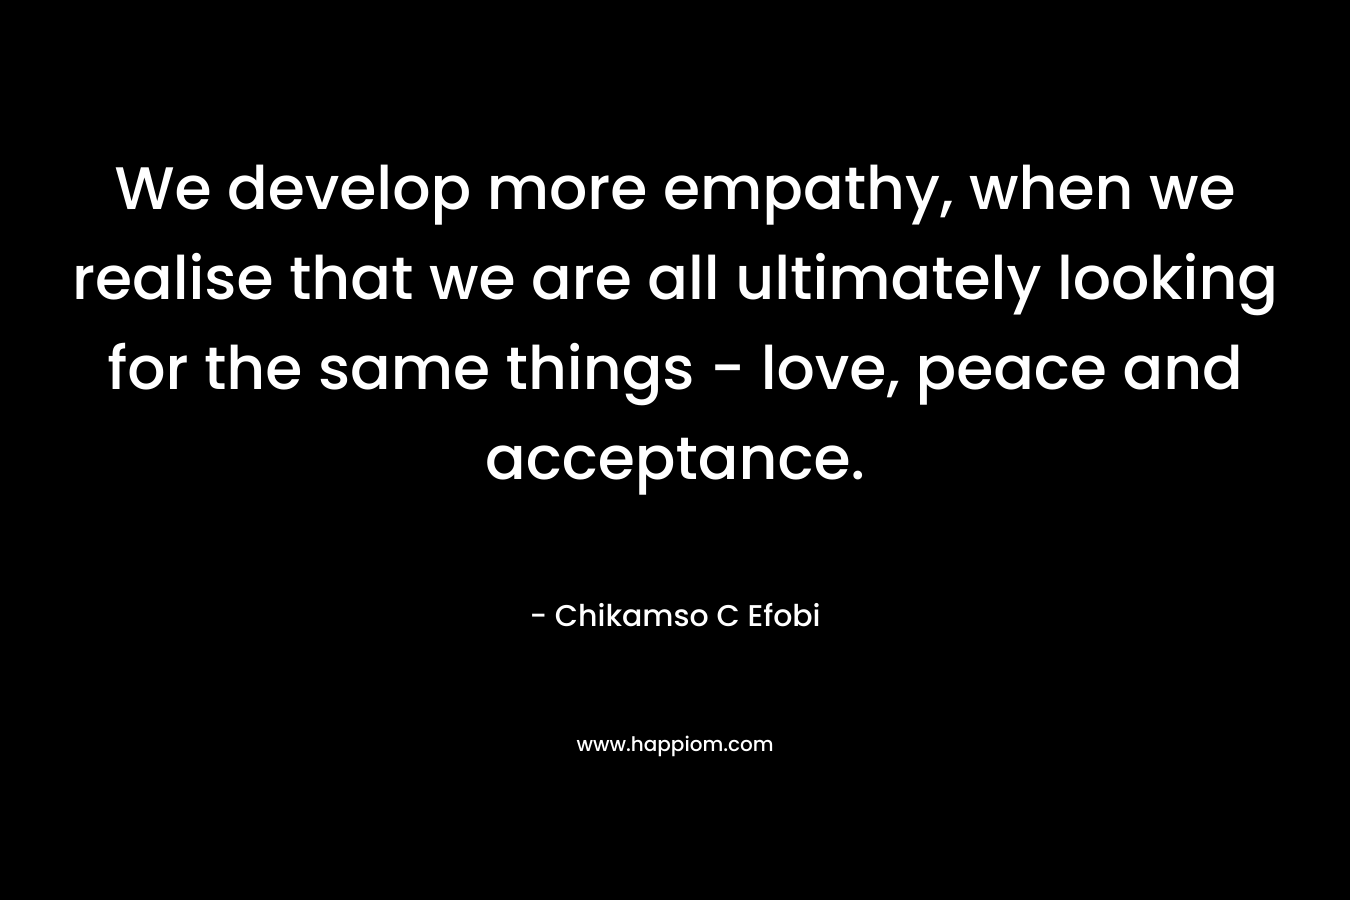 We develop more empathy, when we realise that we are all ultimately looking for the same things – love, peace and acceptance. – Chikamso C Efobi